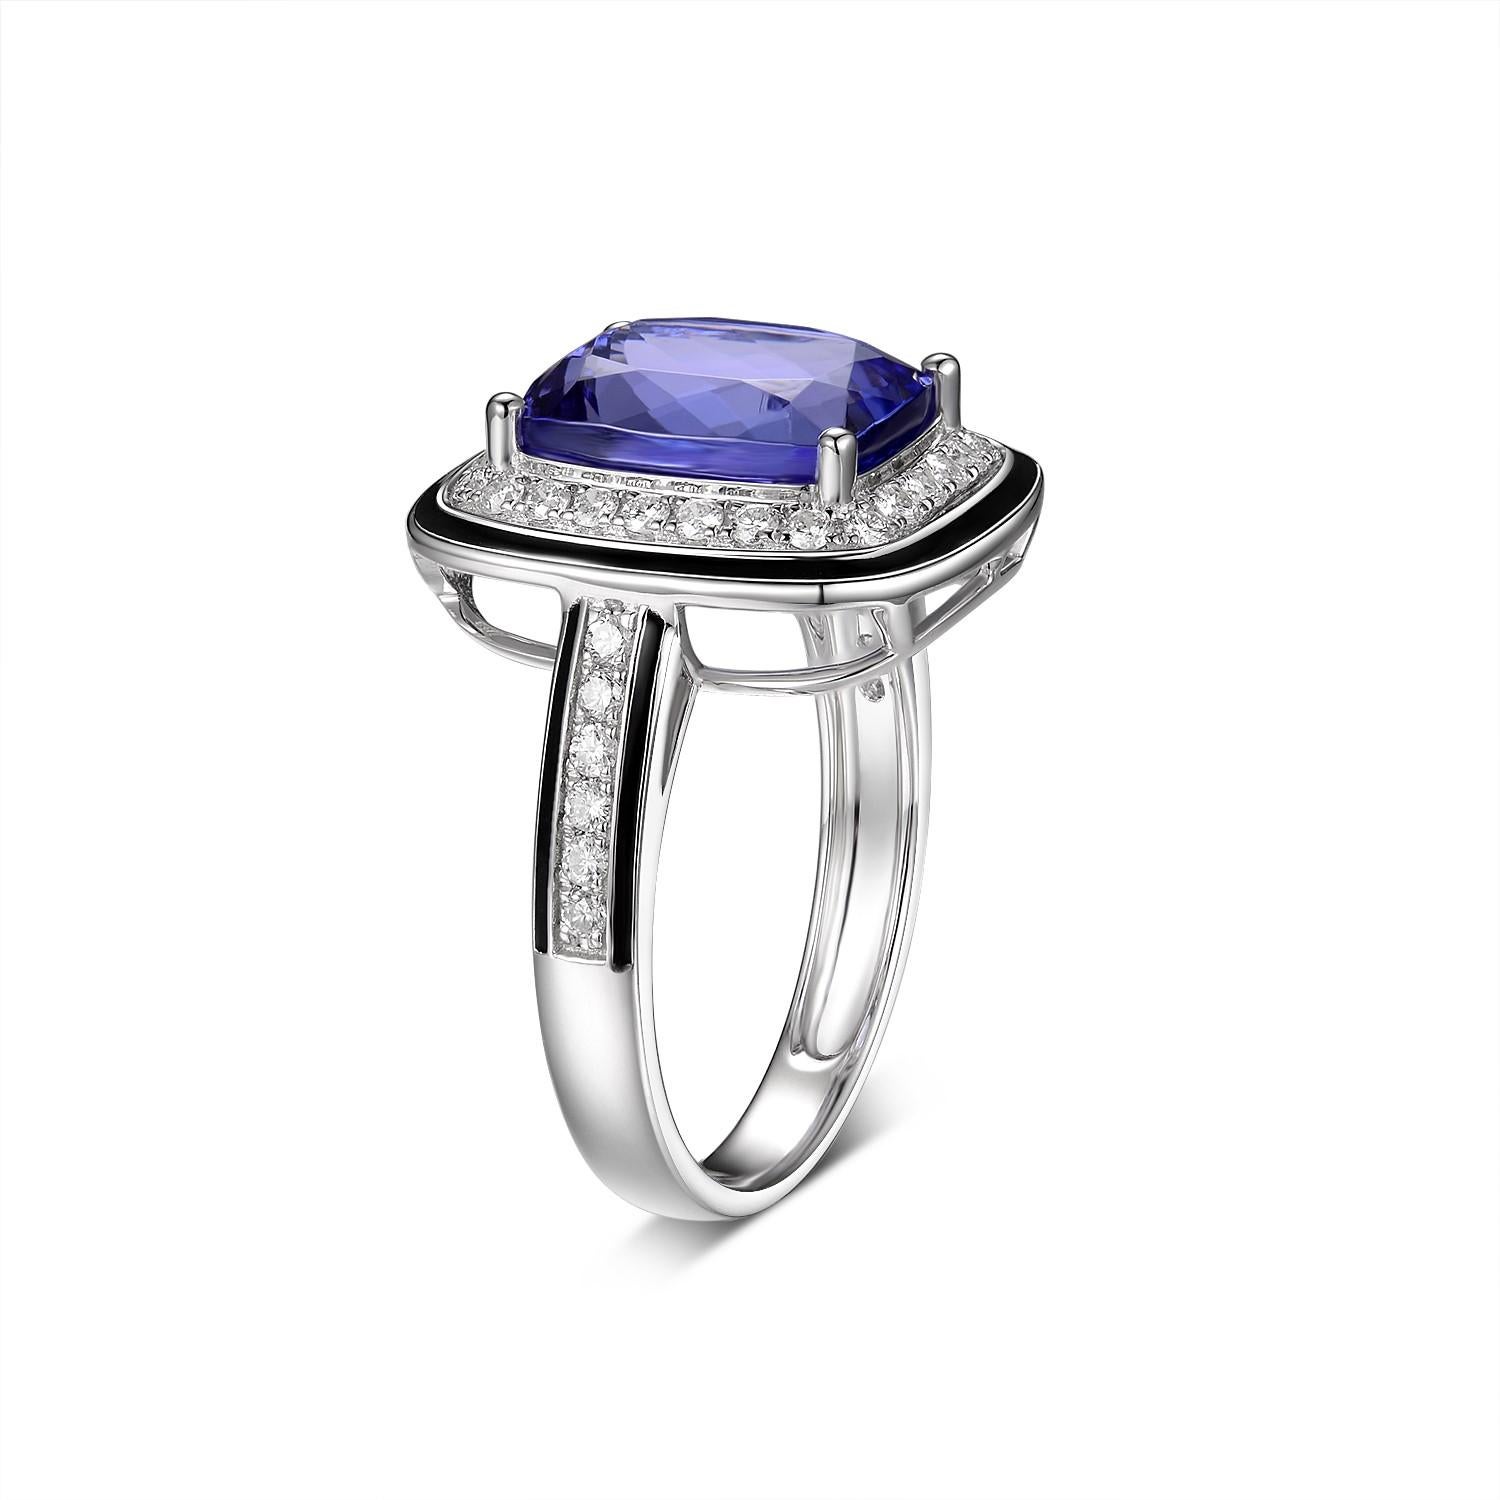 This stunning piece features 4.60 carats of cushion tanzanite in the center. The main stone is assented with a diamond halo then outlined with black enamel. A classic yet modern design. 

US 6.5
Tanzanite 4.60 carat
Diamond 0.37 carat
Black Enamel